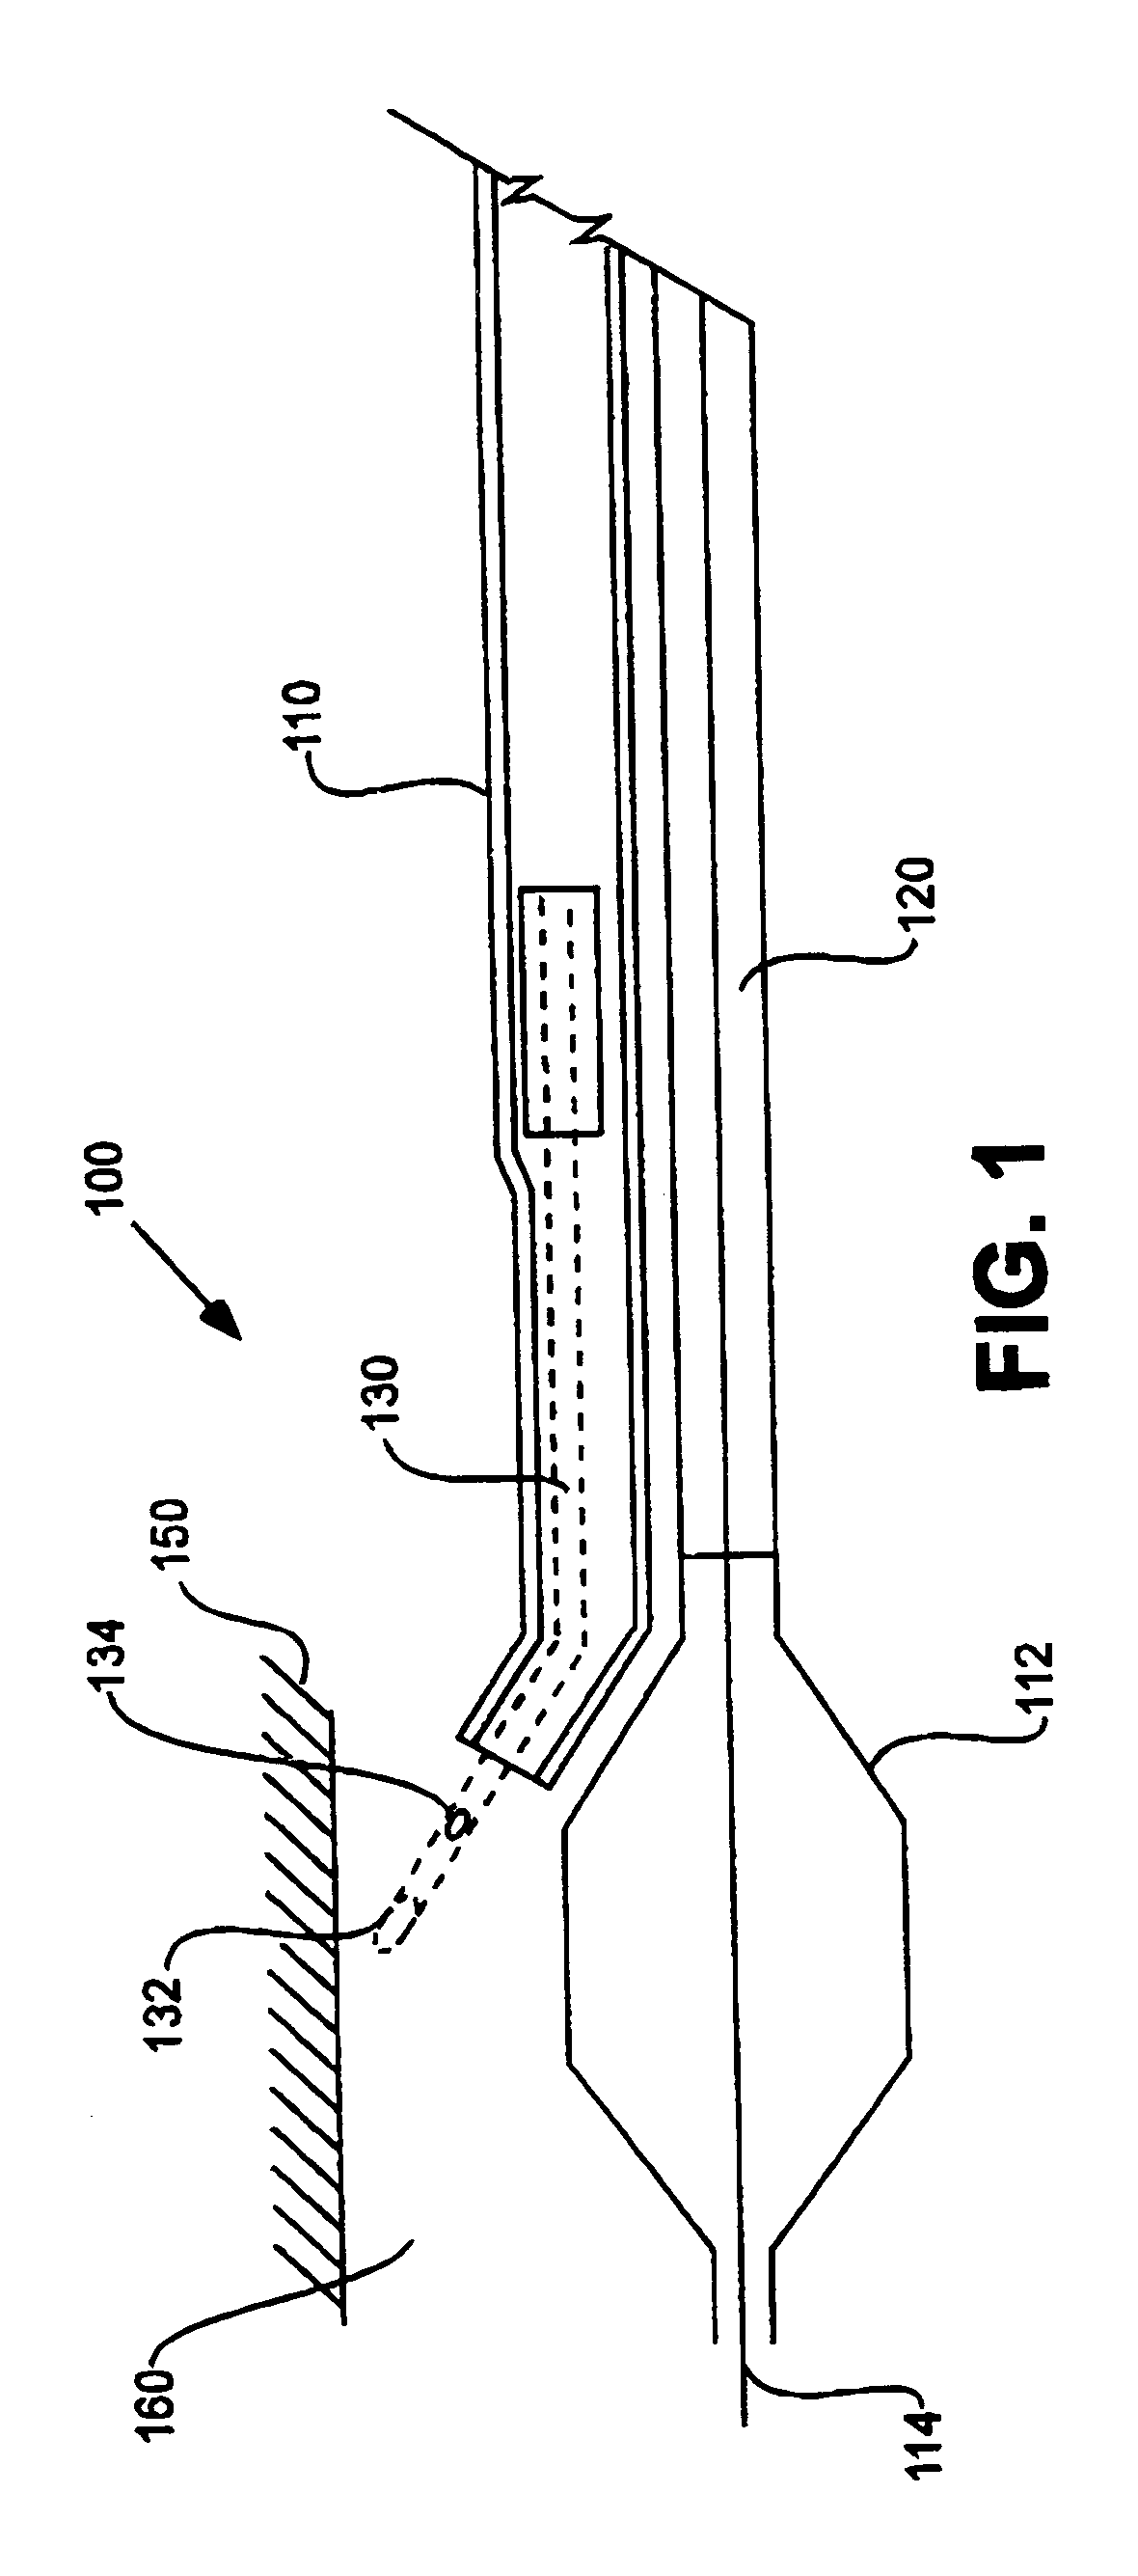 Systems and methods for detecting tissue contact and needle penetration depth